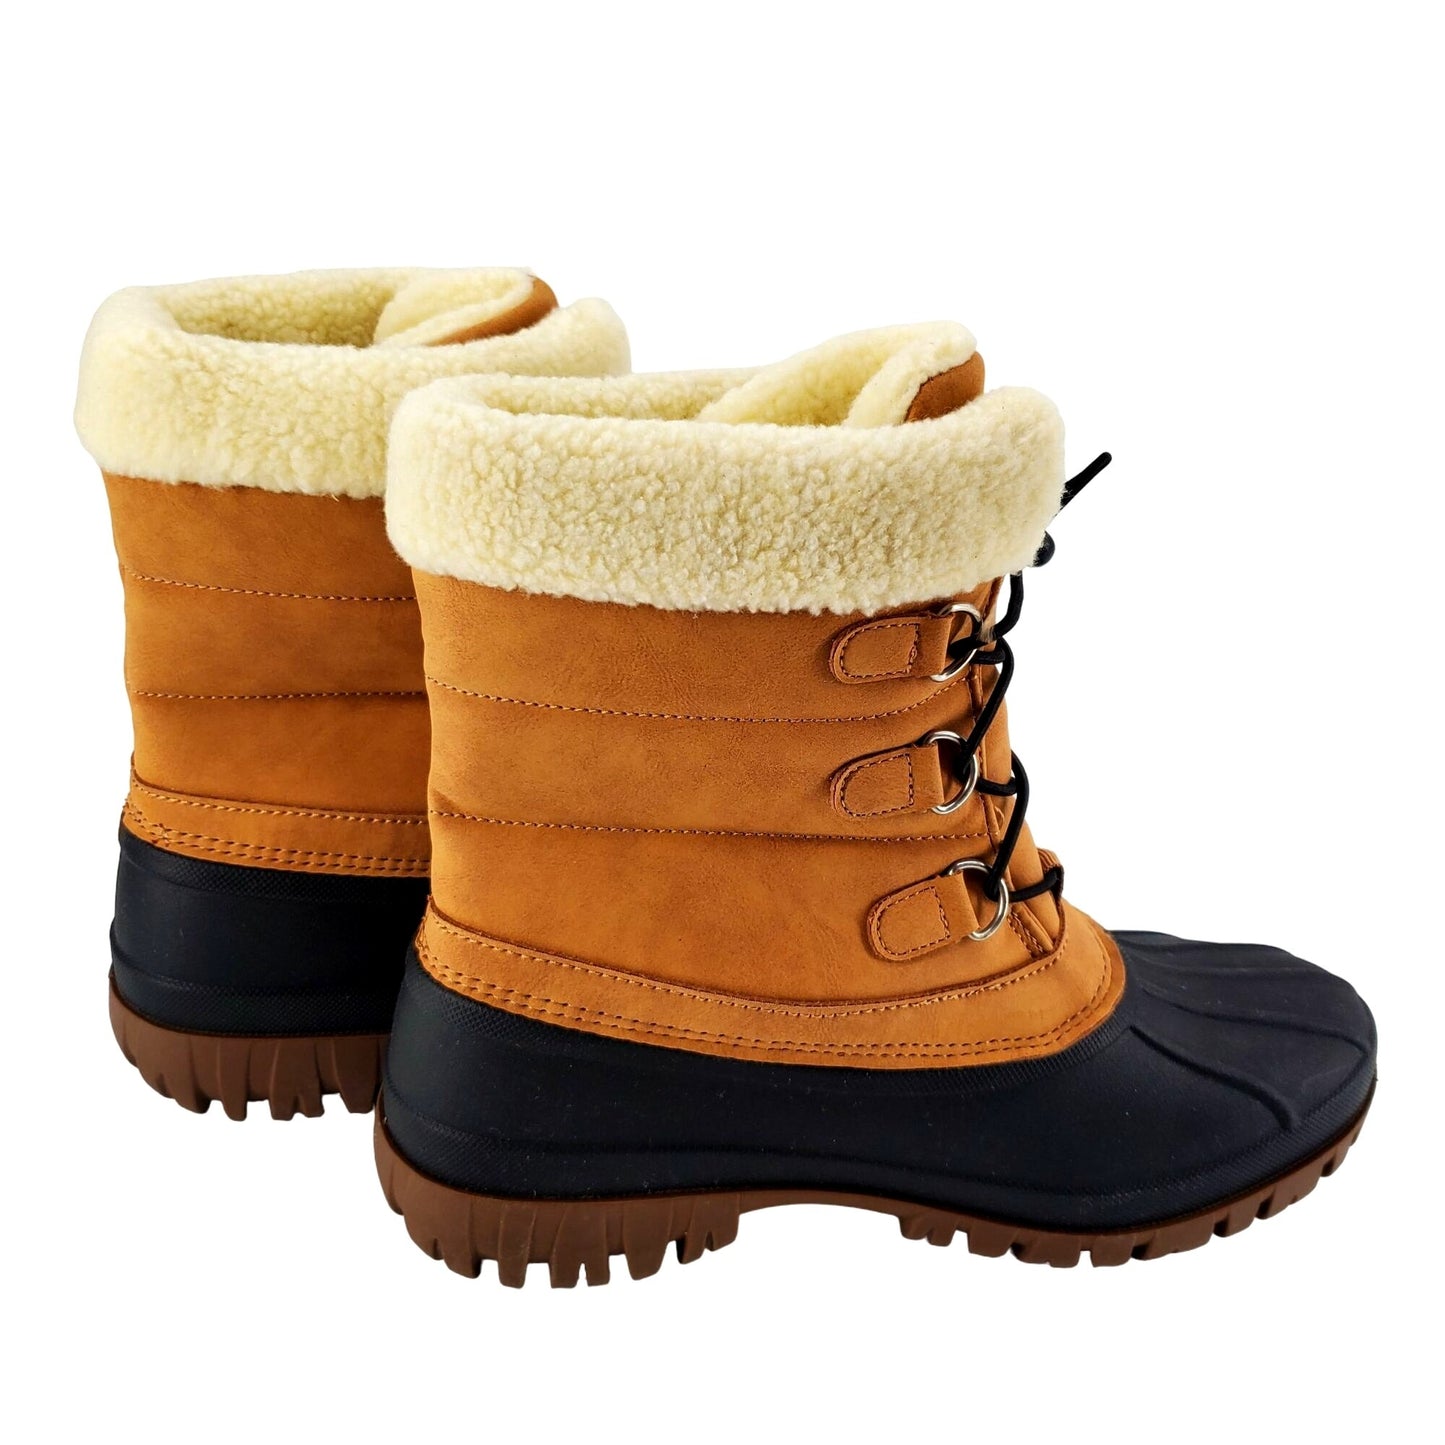 CHOOKA Boots 6 Duck Waterproof Cold Weather Snow Rain Shoes Outdoor Shearling